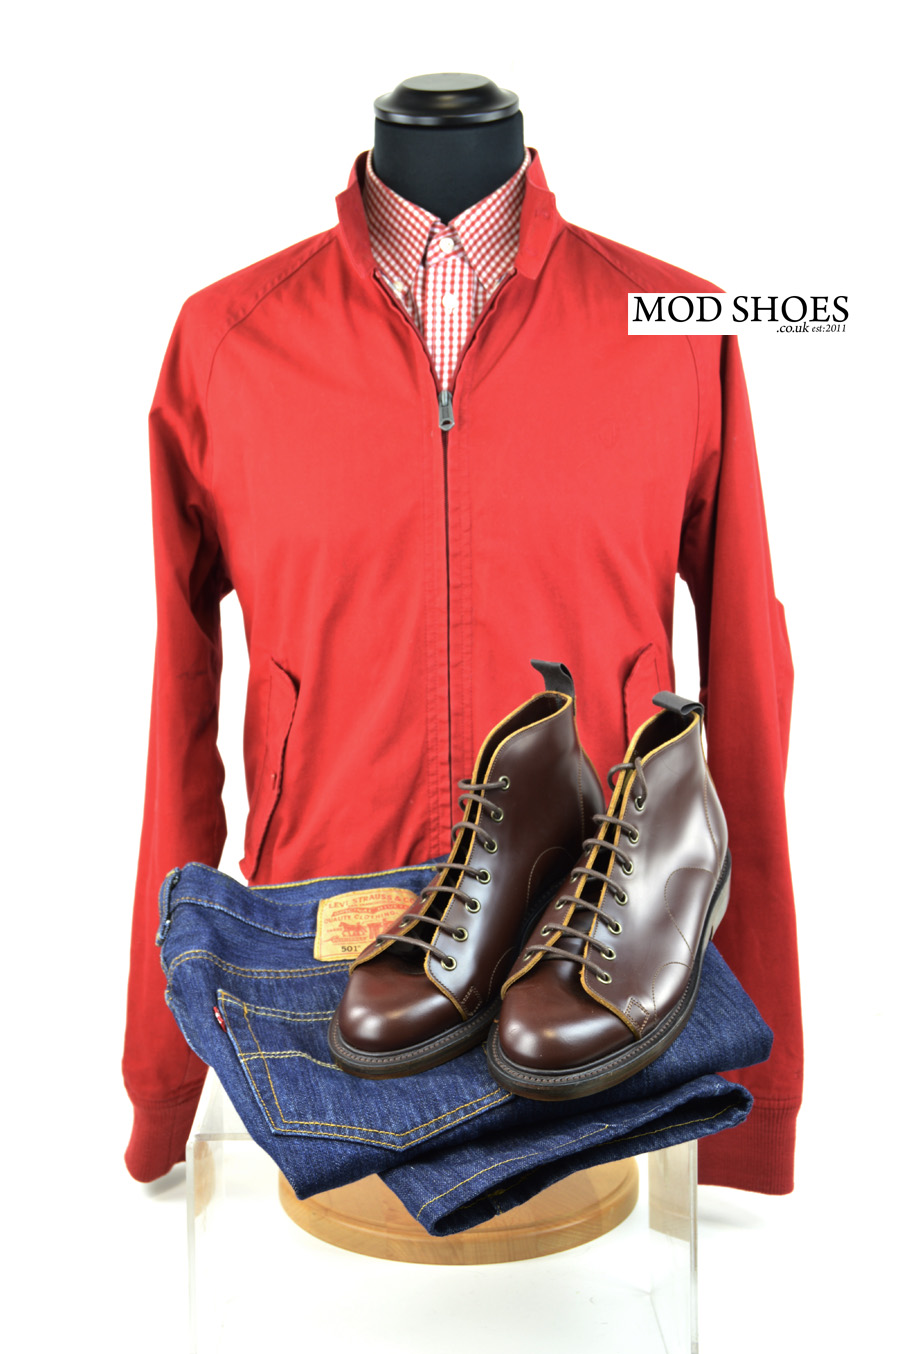 modshoes nut brown monkey boots with red harrington